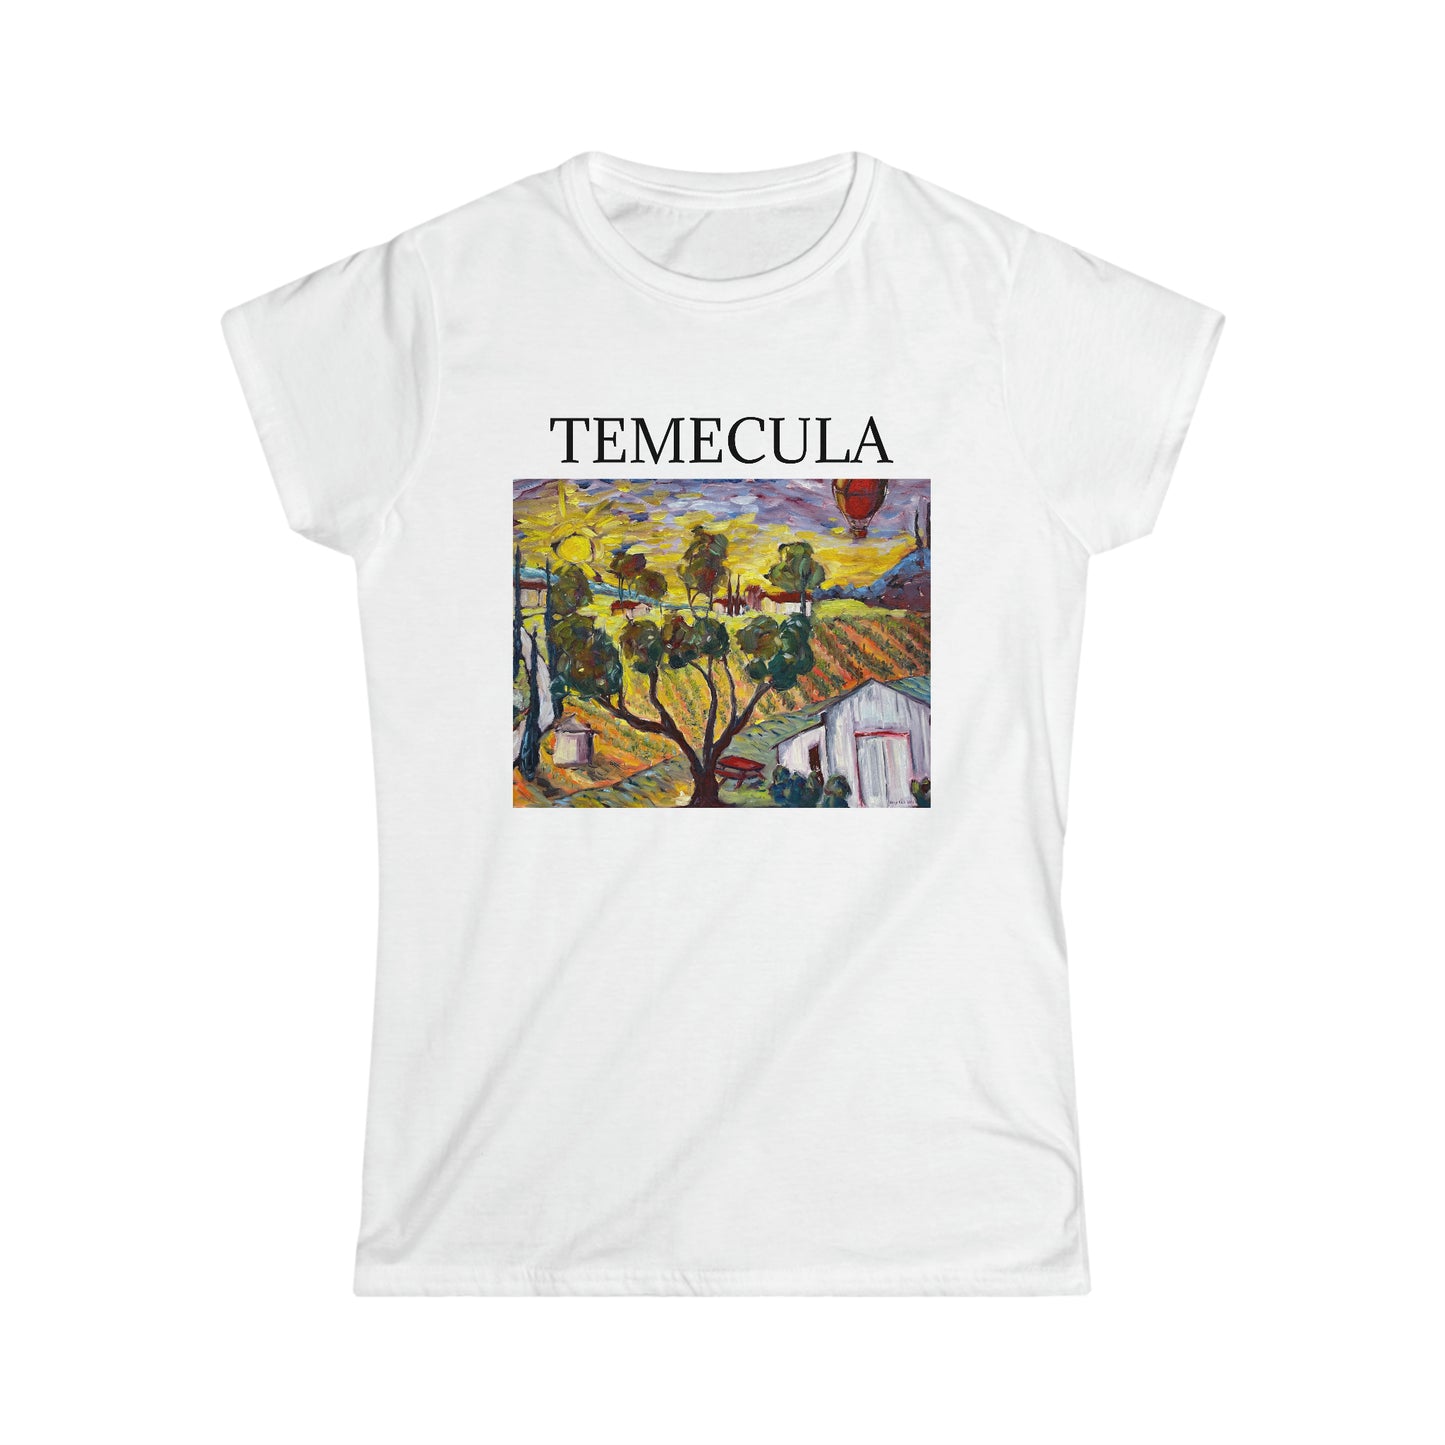 Ultimate Sunrise "TEMECULA" Women's Softstyle  Semi-Fitted Tee